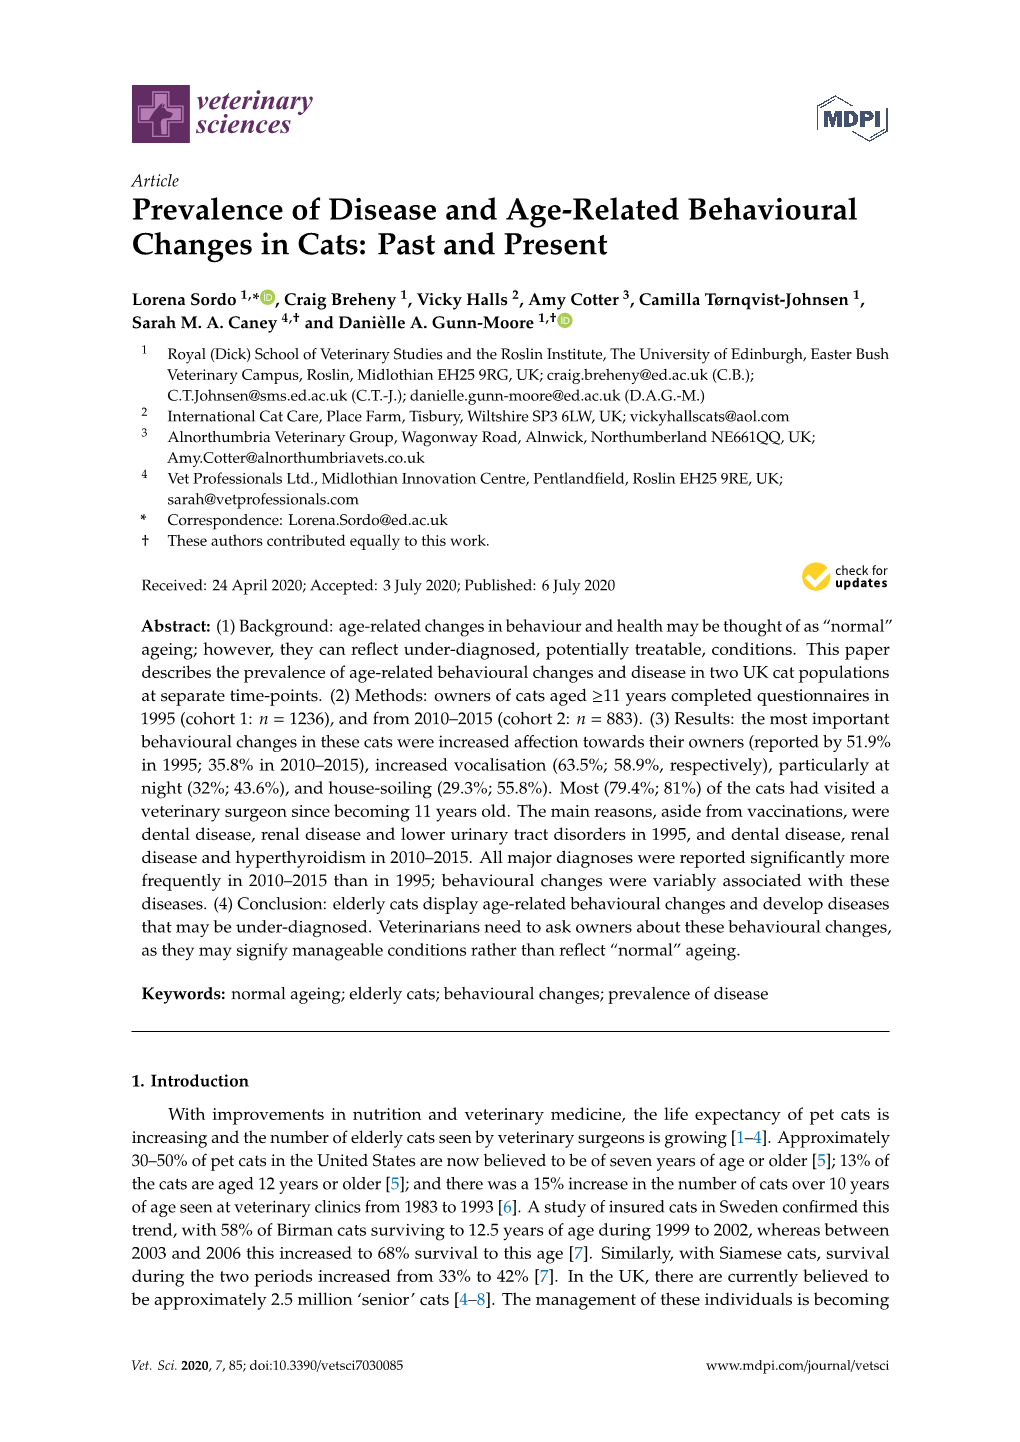 Prevalence of Disease and Age-Related Behavioural Changes in Cats: Past and Present